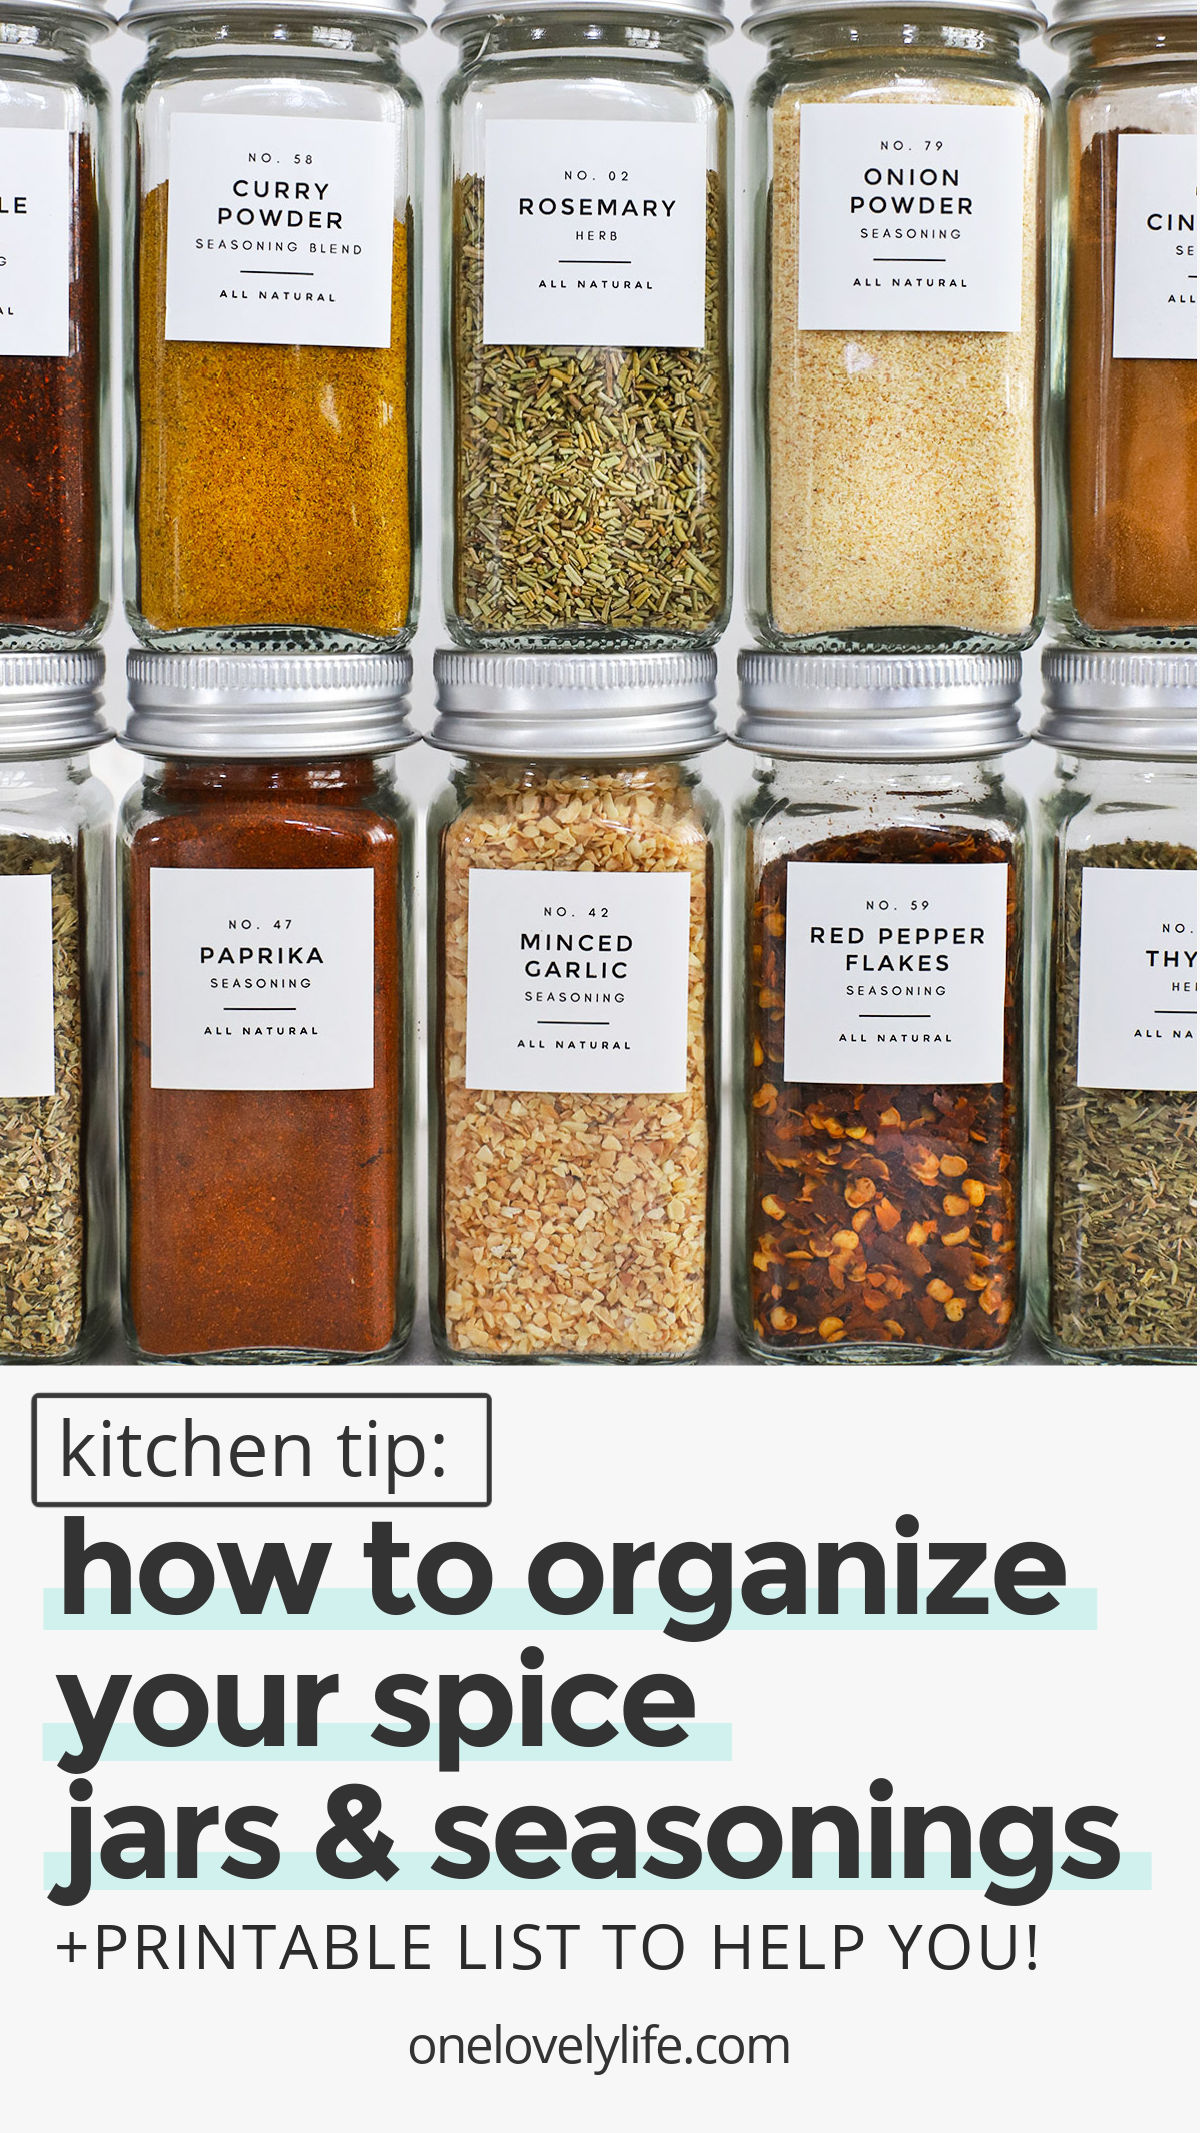 Spice Organization - Here's how we declutter and organize our spices and seasonings. Don't miss our printable list of herbs and spices to help you update your spice cupboard or add flavor to your meals. // printable list of spices and herbs // common herbs and spices // spice jar organization / spice cupboard organization / kitchen organization / how to organize spices / how to organize spice jars / kitchen decluttering / spice jar labels /